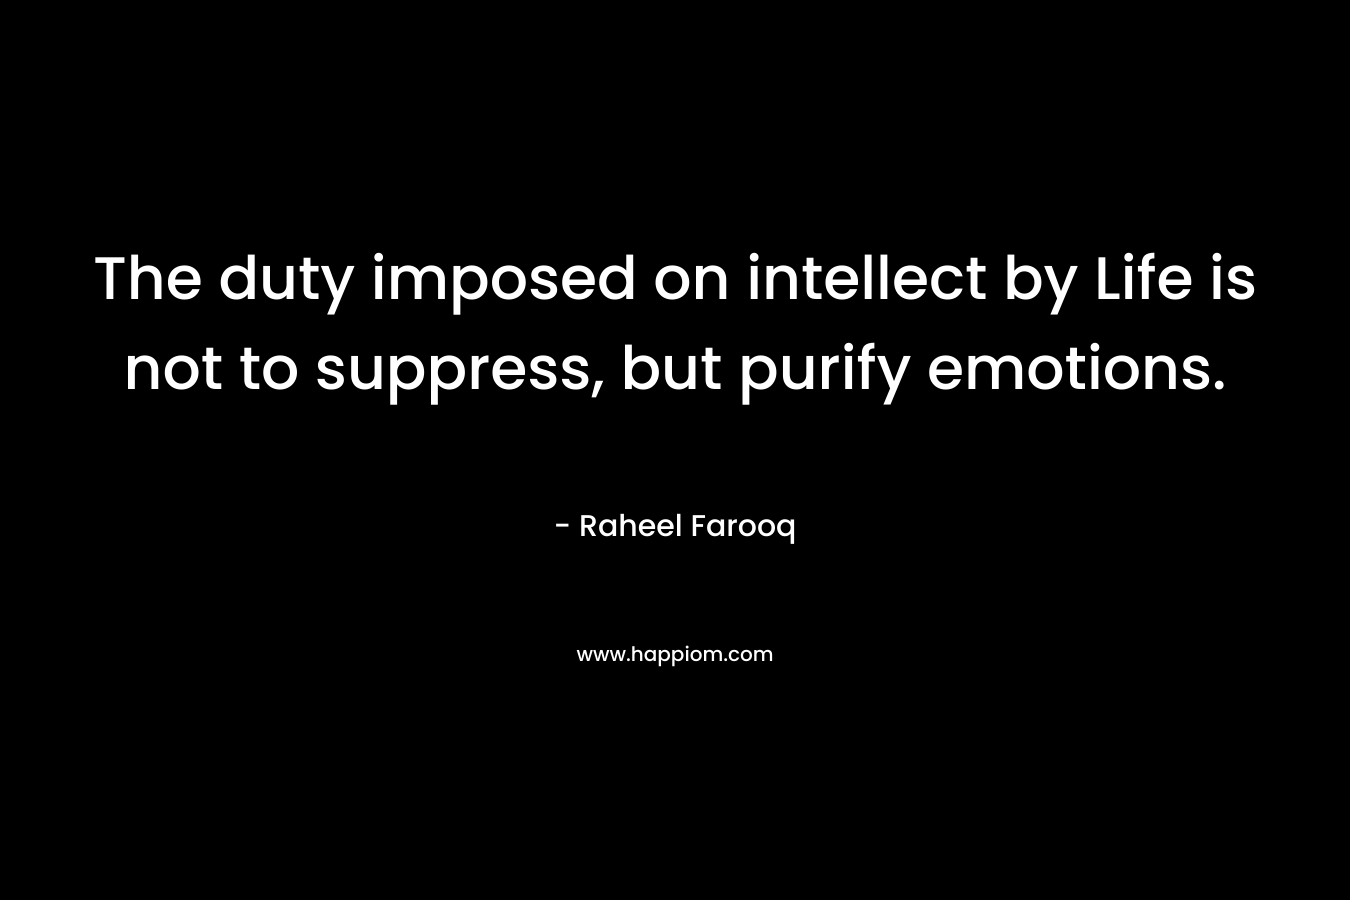 The duty imposed on intellect by Life is not to suppress, but purify emotions. – Raheel Farooq